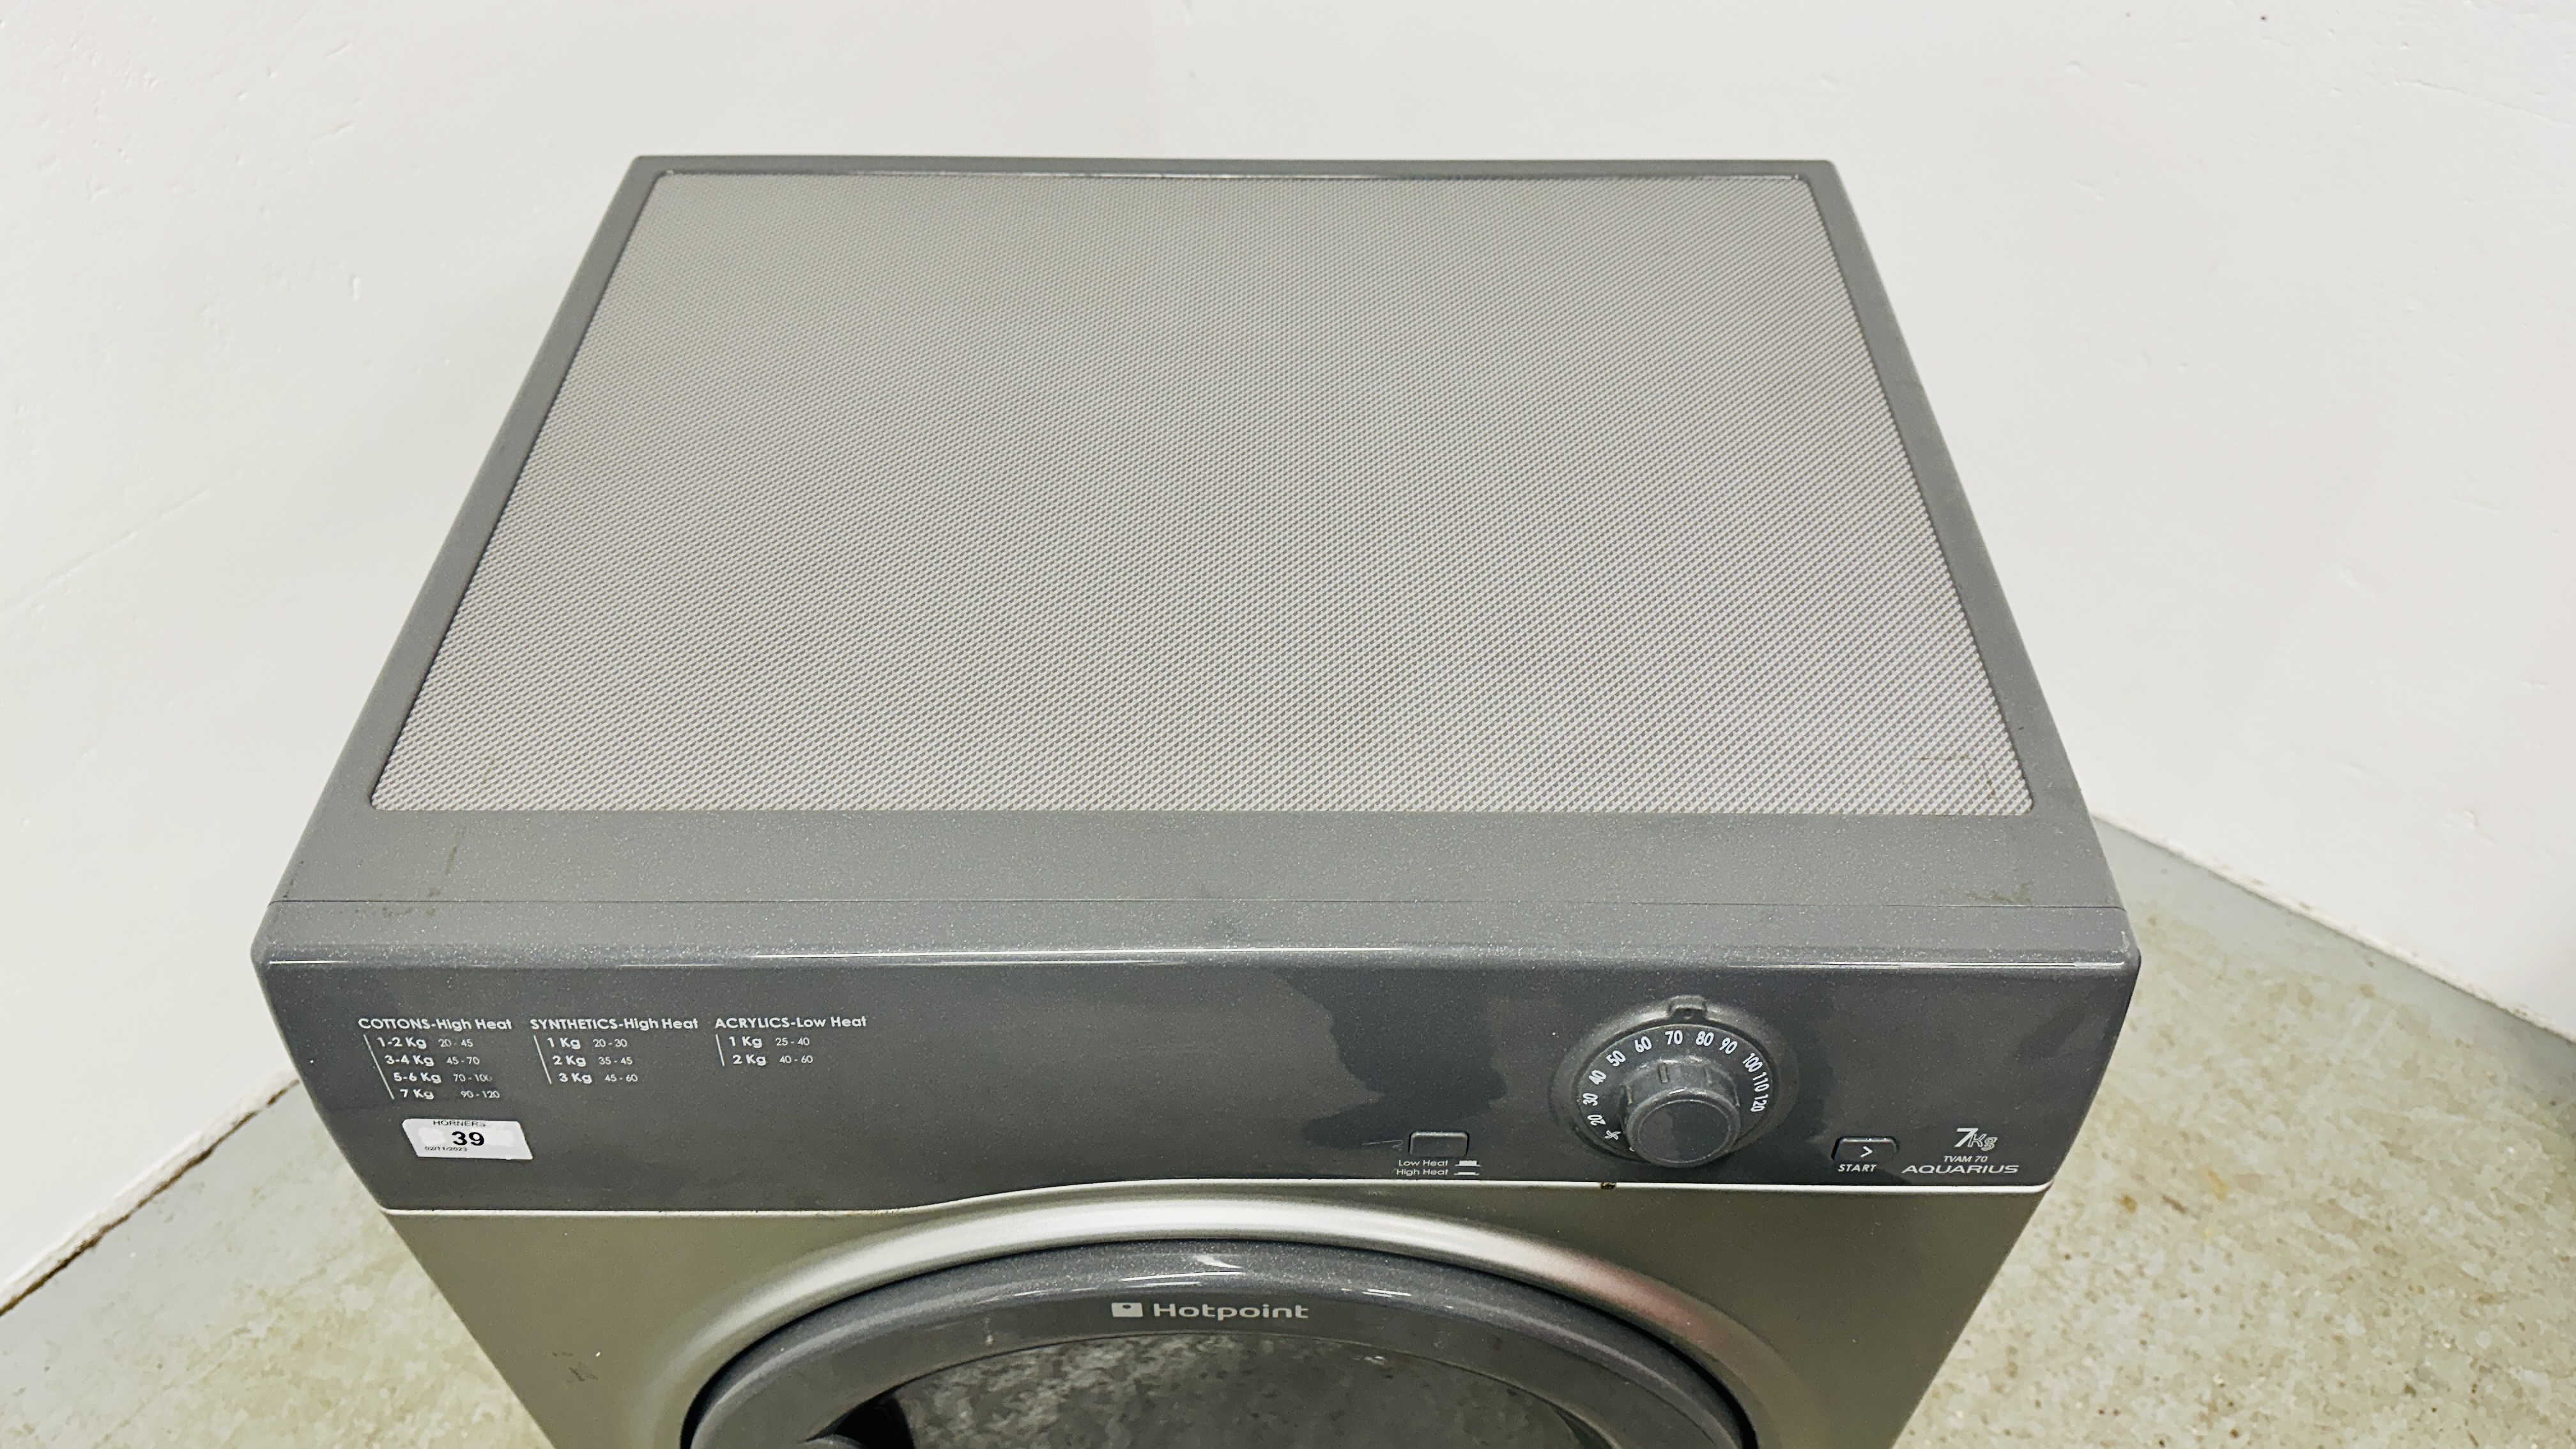 HOTPOINT AQUARIUS 7KG TUMBLE DRYER, SILVER FINISH - SOLD AS SEEN. - Image 3 of 6